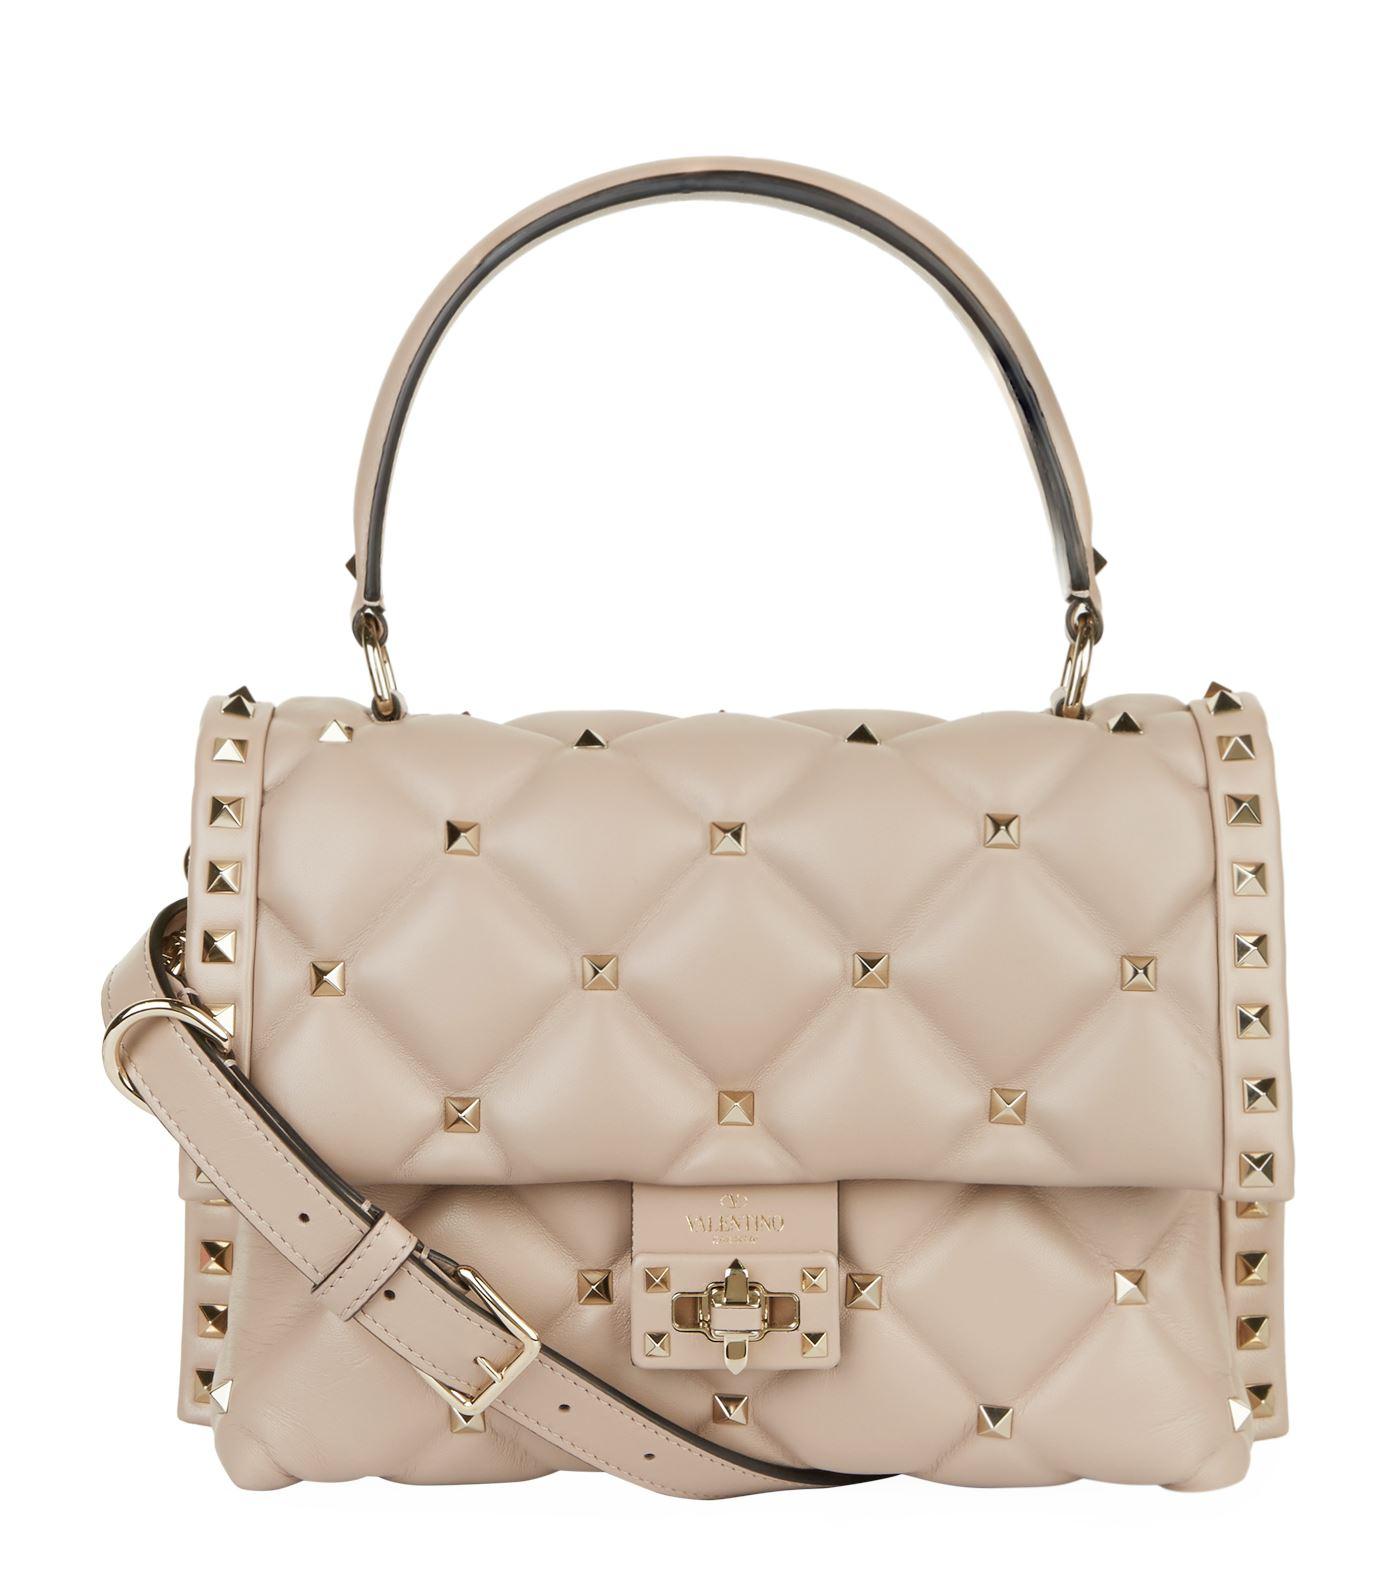 Valentino Mini Leather Candystud Top Handle Bag in Nude (Natural) - Lyst